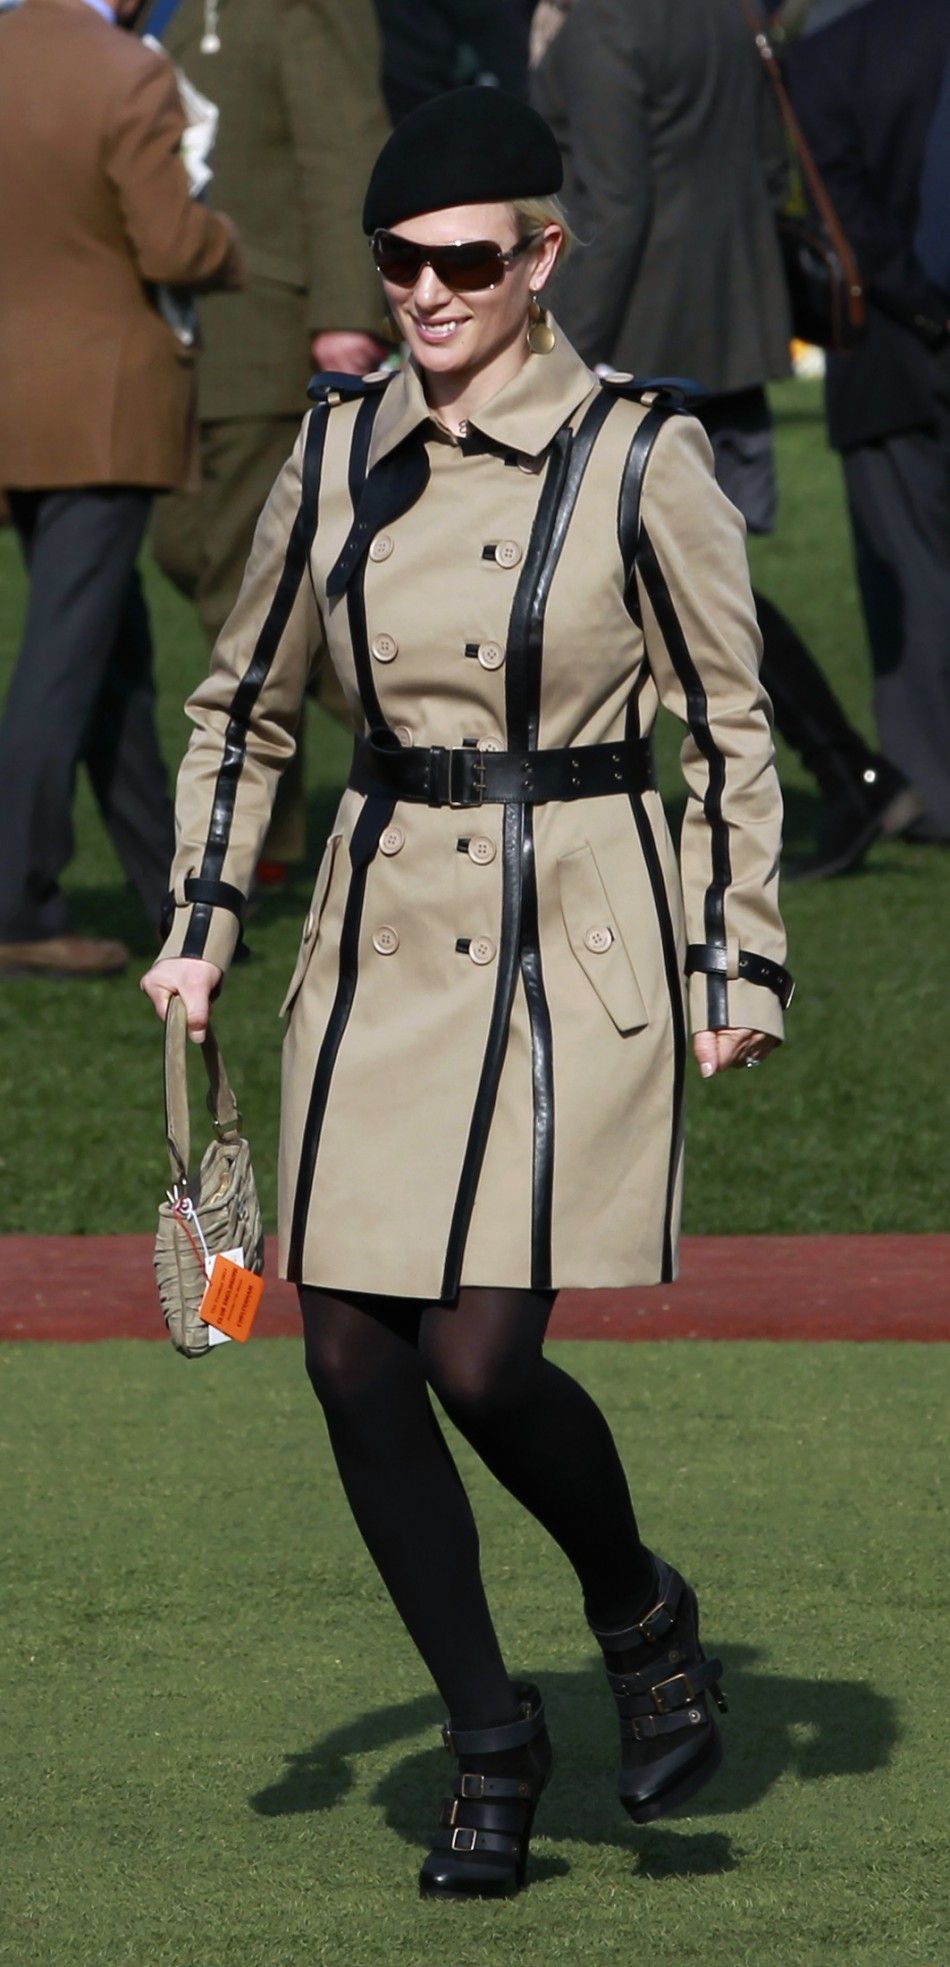 Britains Zara Phillips smiles as she walks through the unsaddling enclosure during the Cheltenham Festival horse racing meet in Gloucestershire